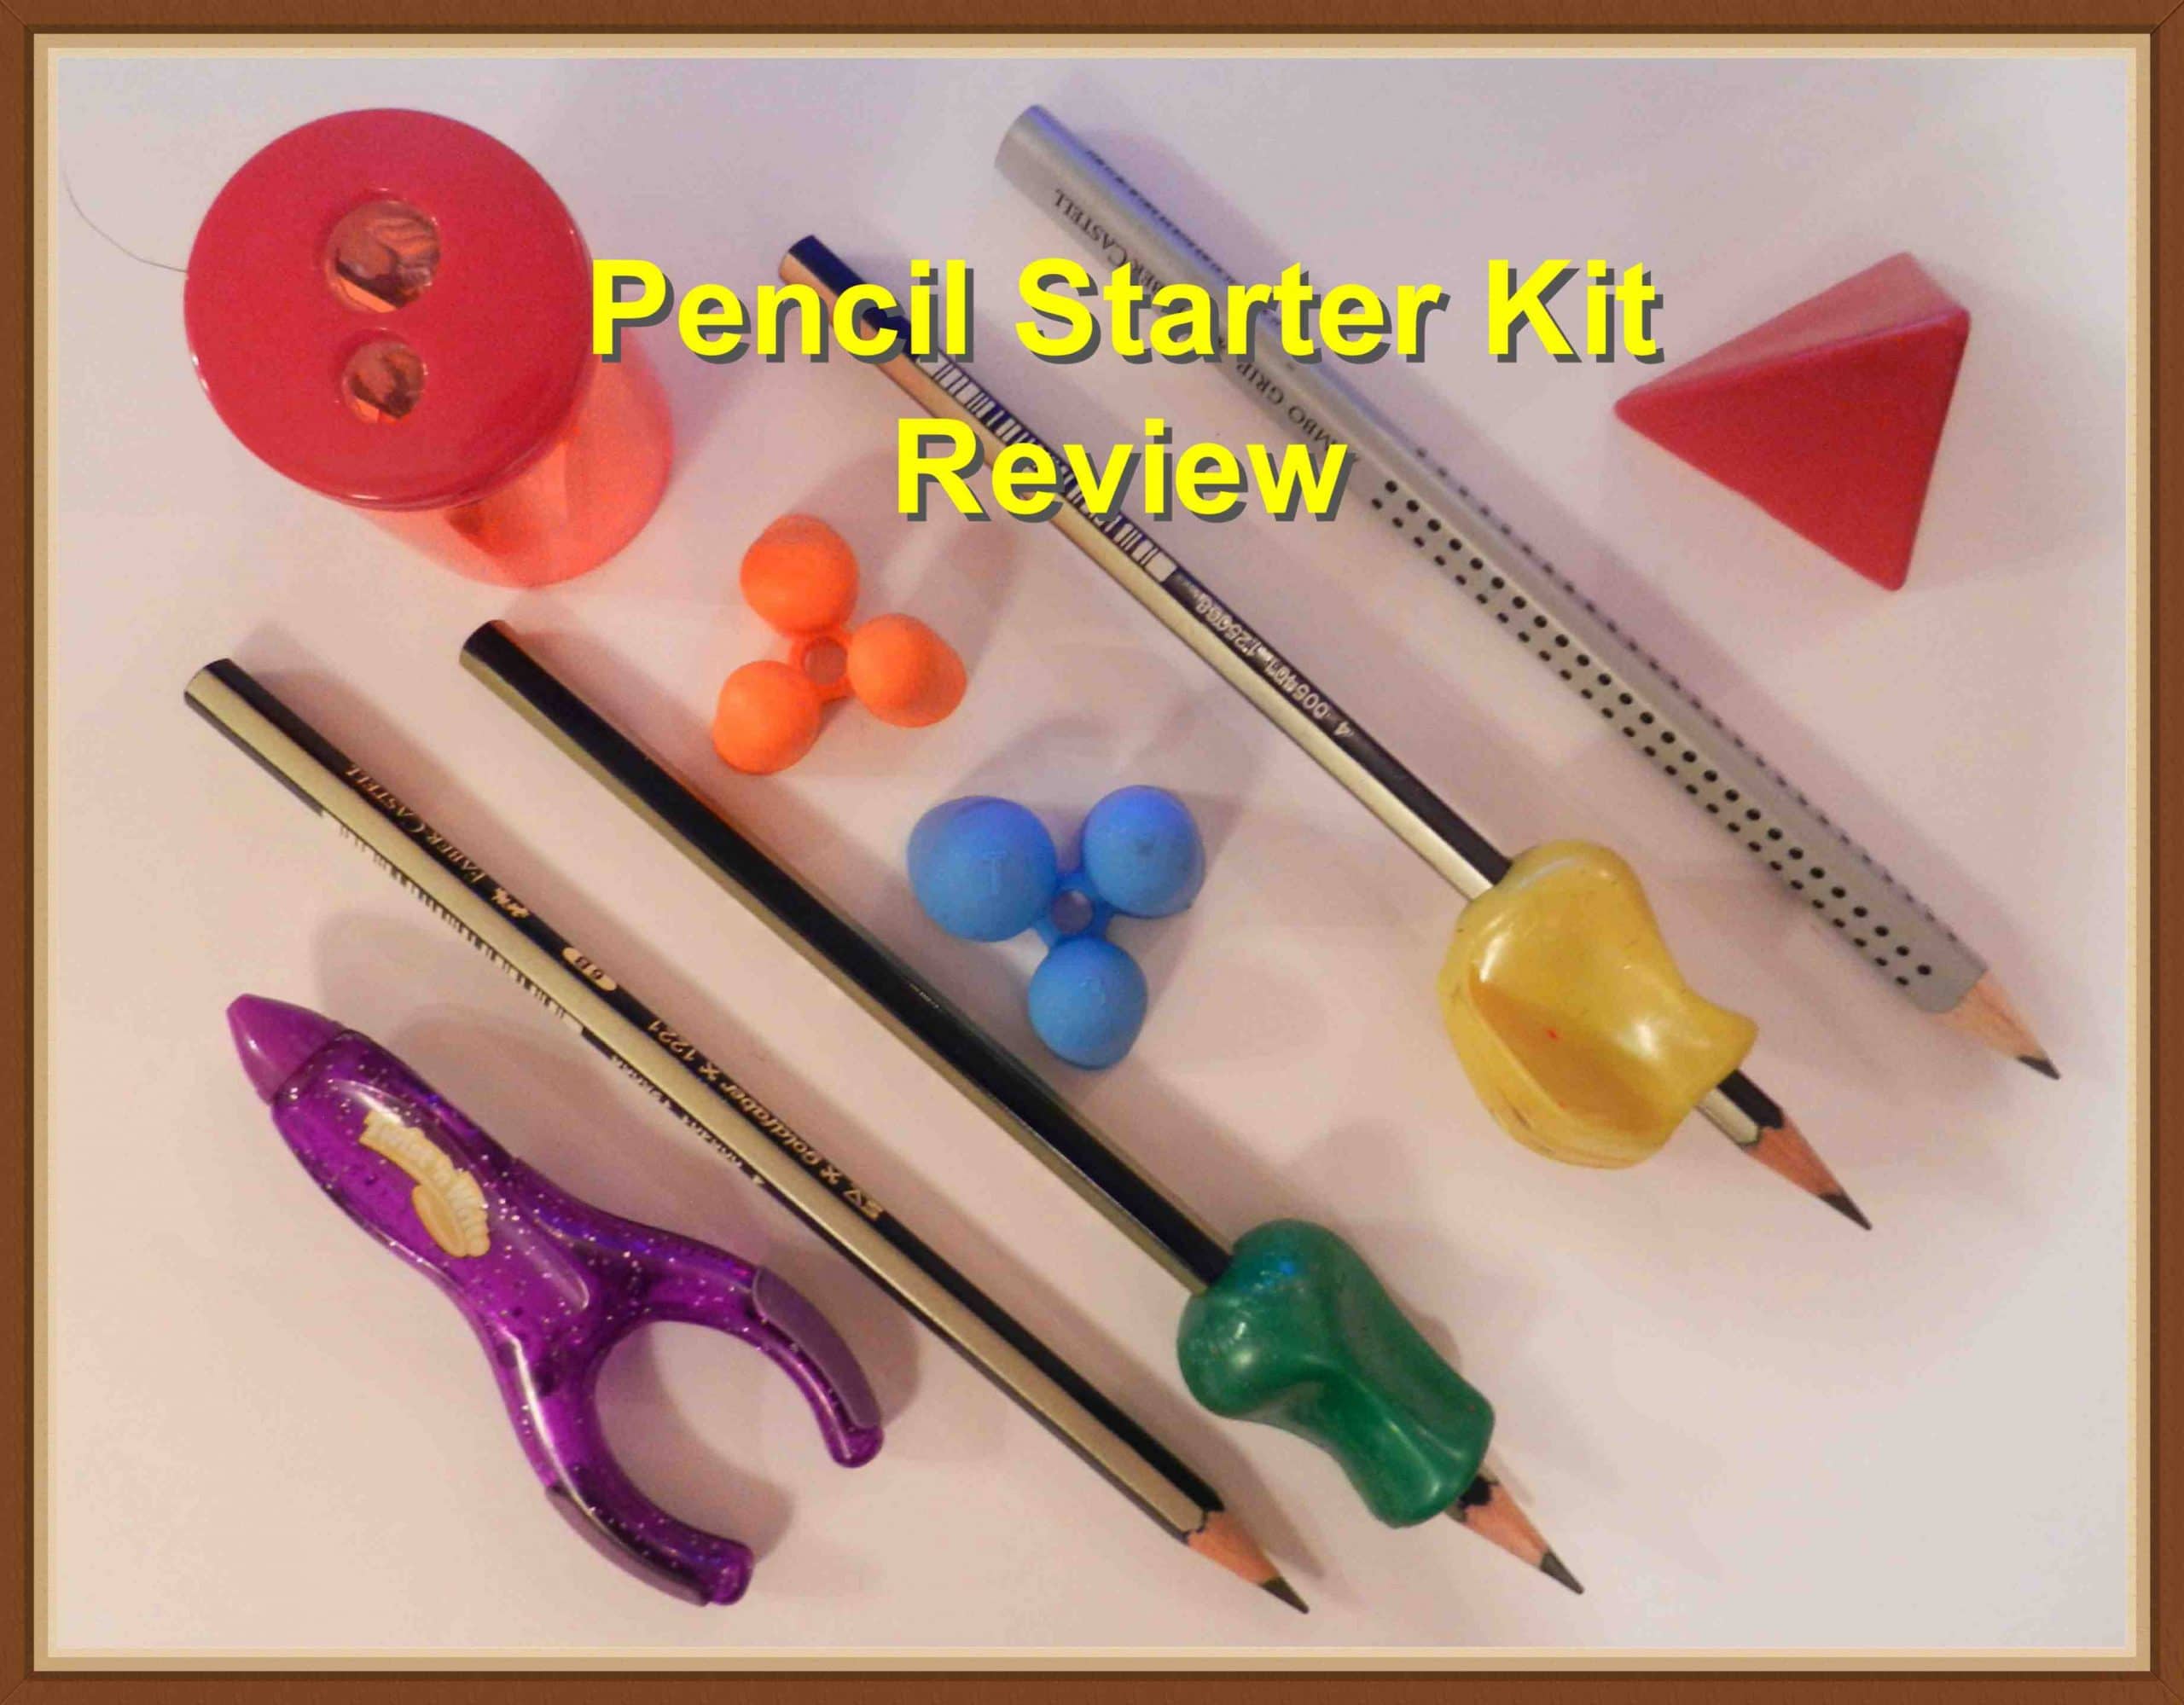 Pencil Grips and Aids by Draw Your World – My Review